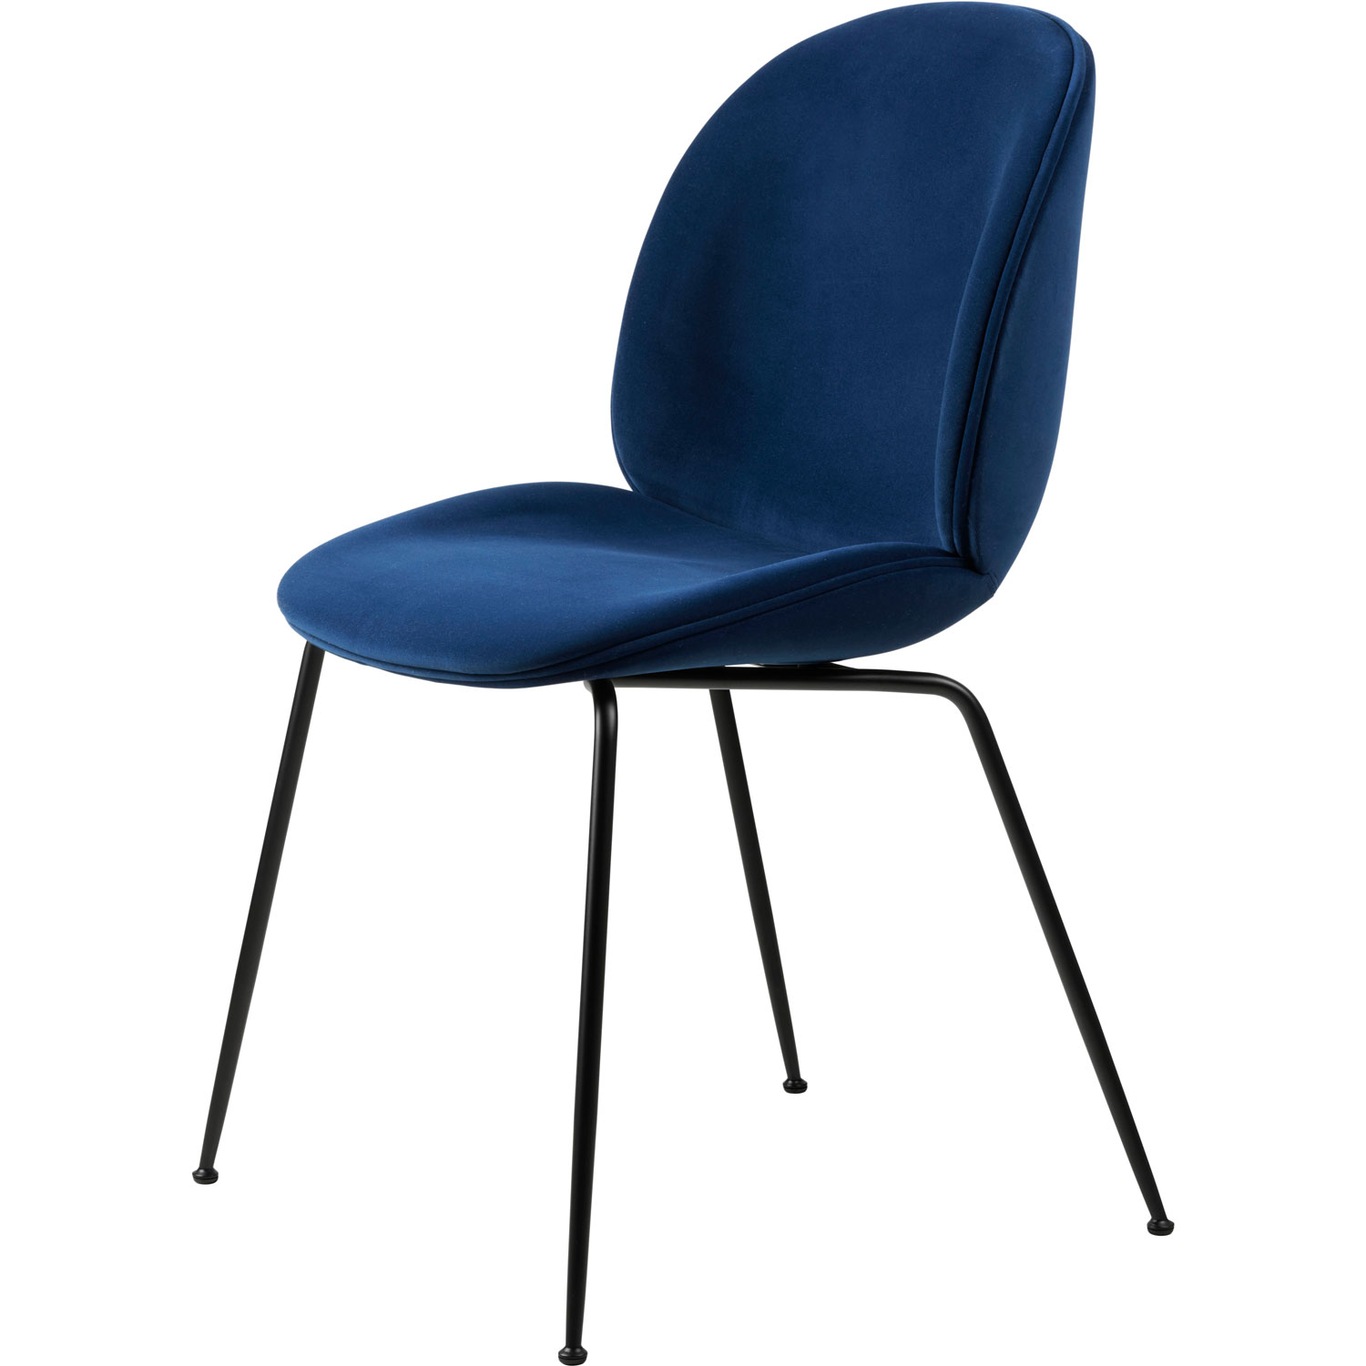 Beetle Chair Upholstered / Conical Base, Sunday 003